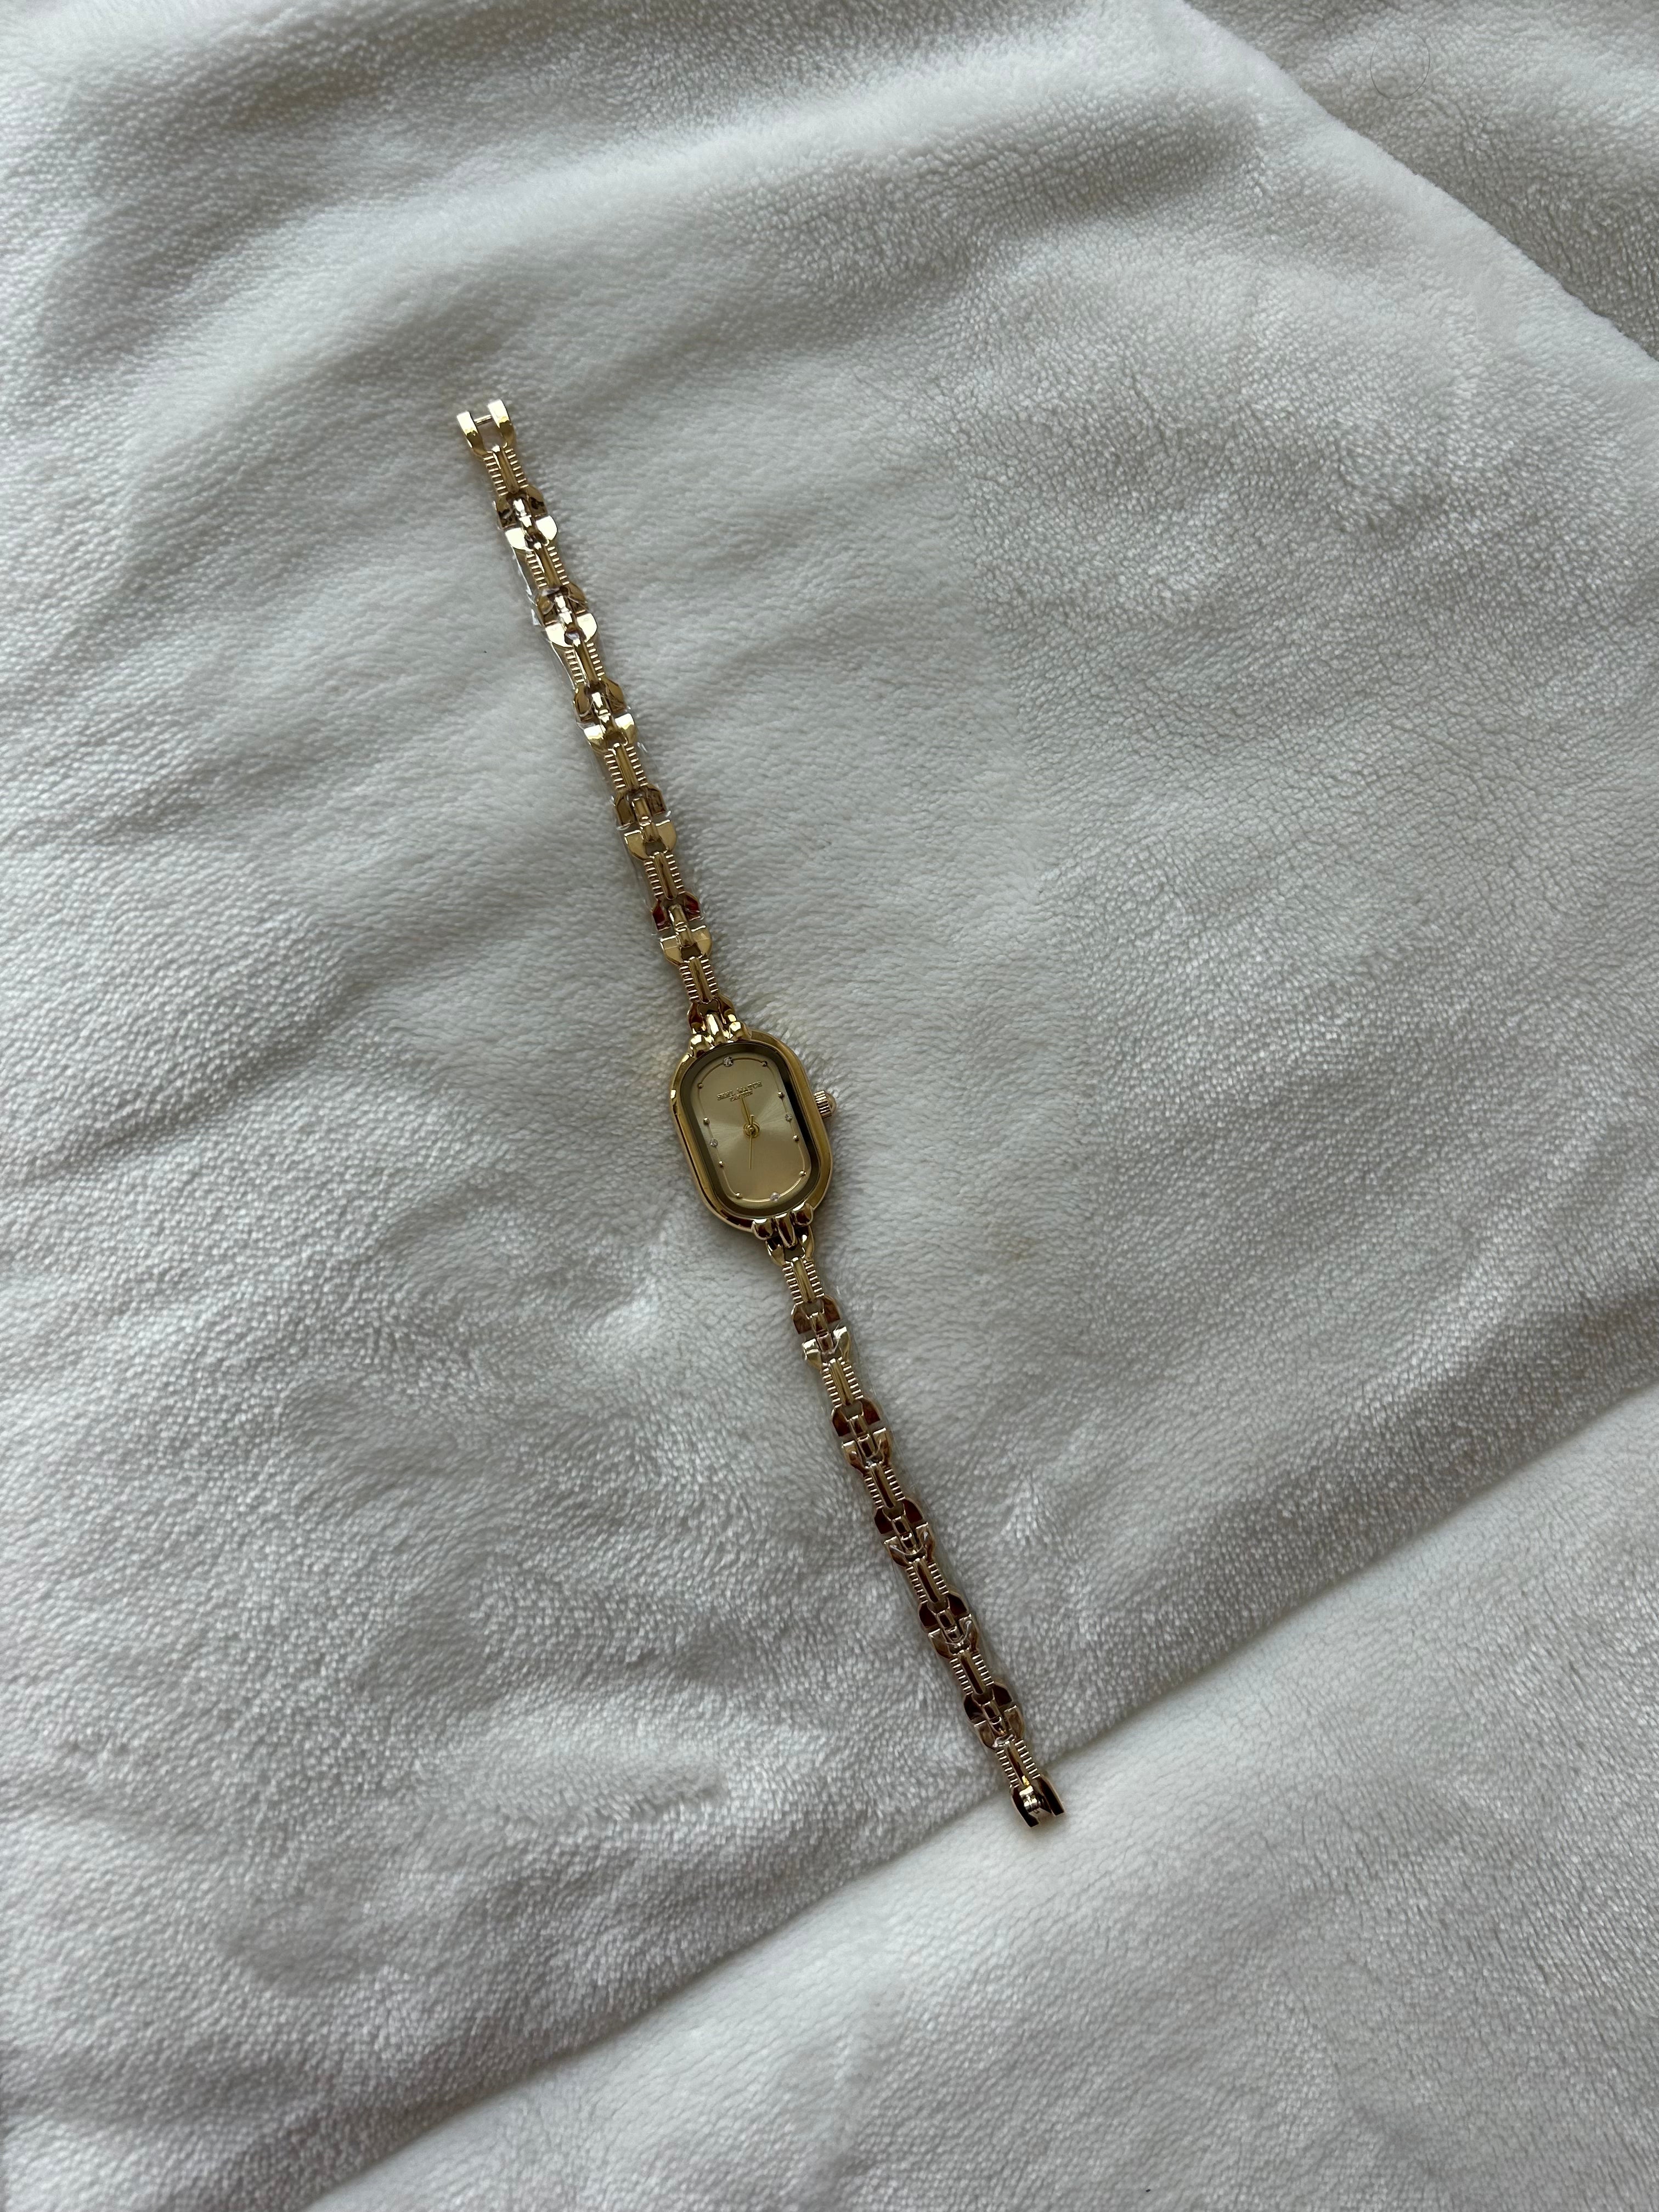 Dainty vintage Minimalist Gold Womens Watch Small Face